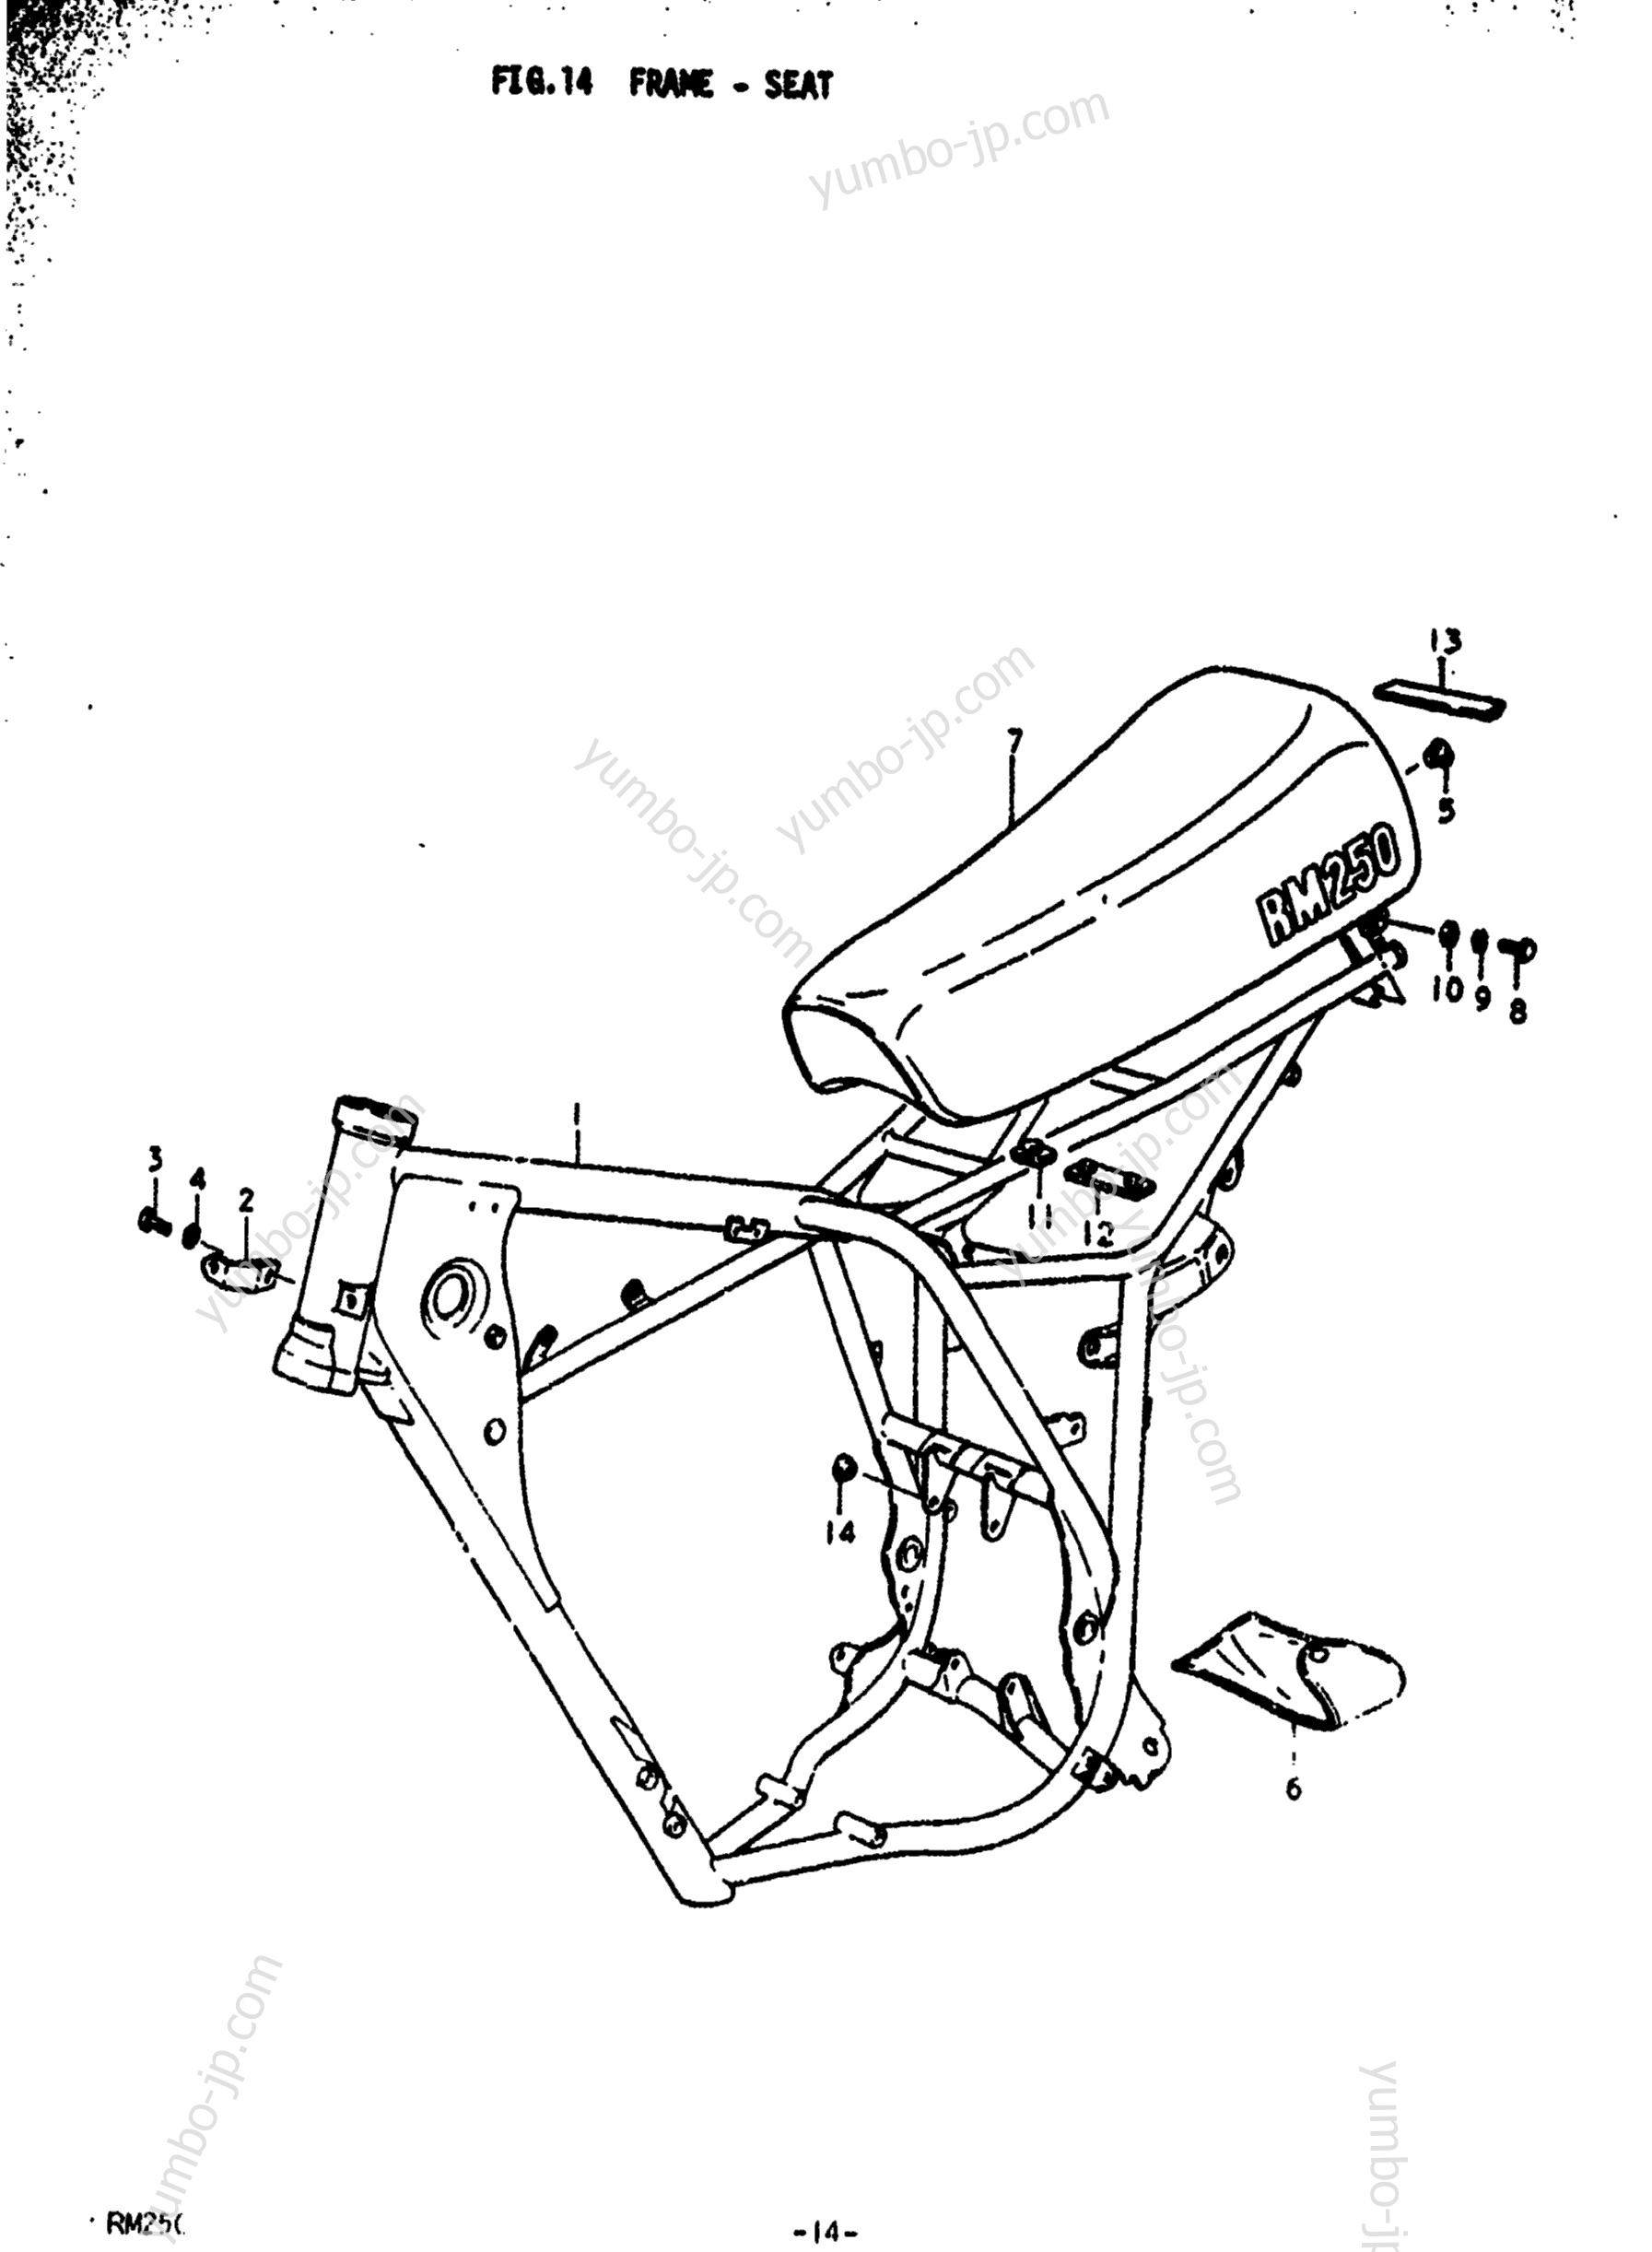 FRAME - SEAT for motorcycles SUZUKI RM250 1976 year